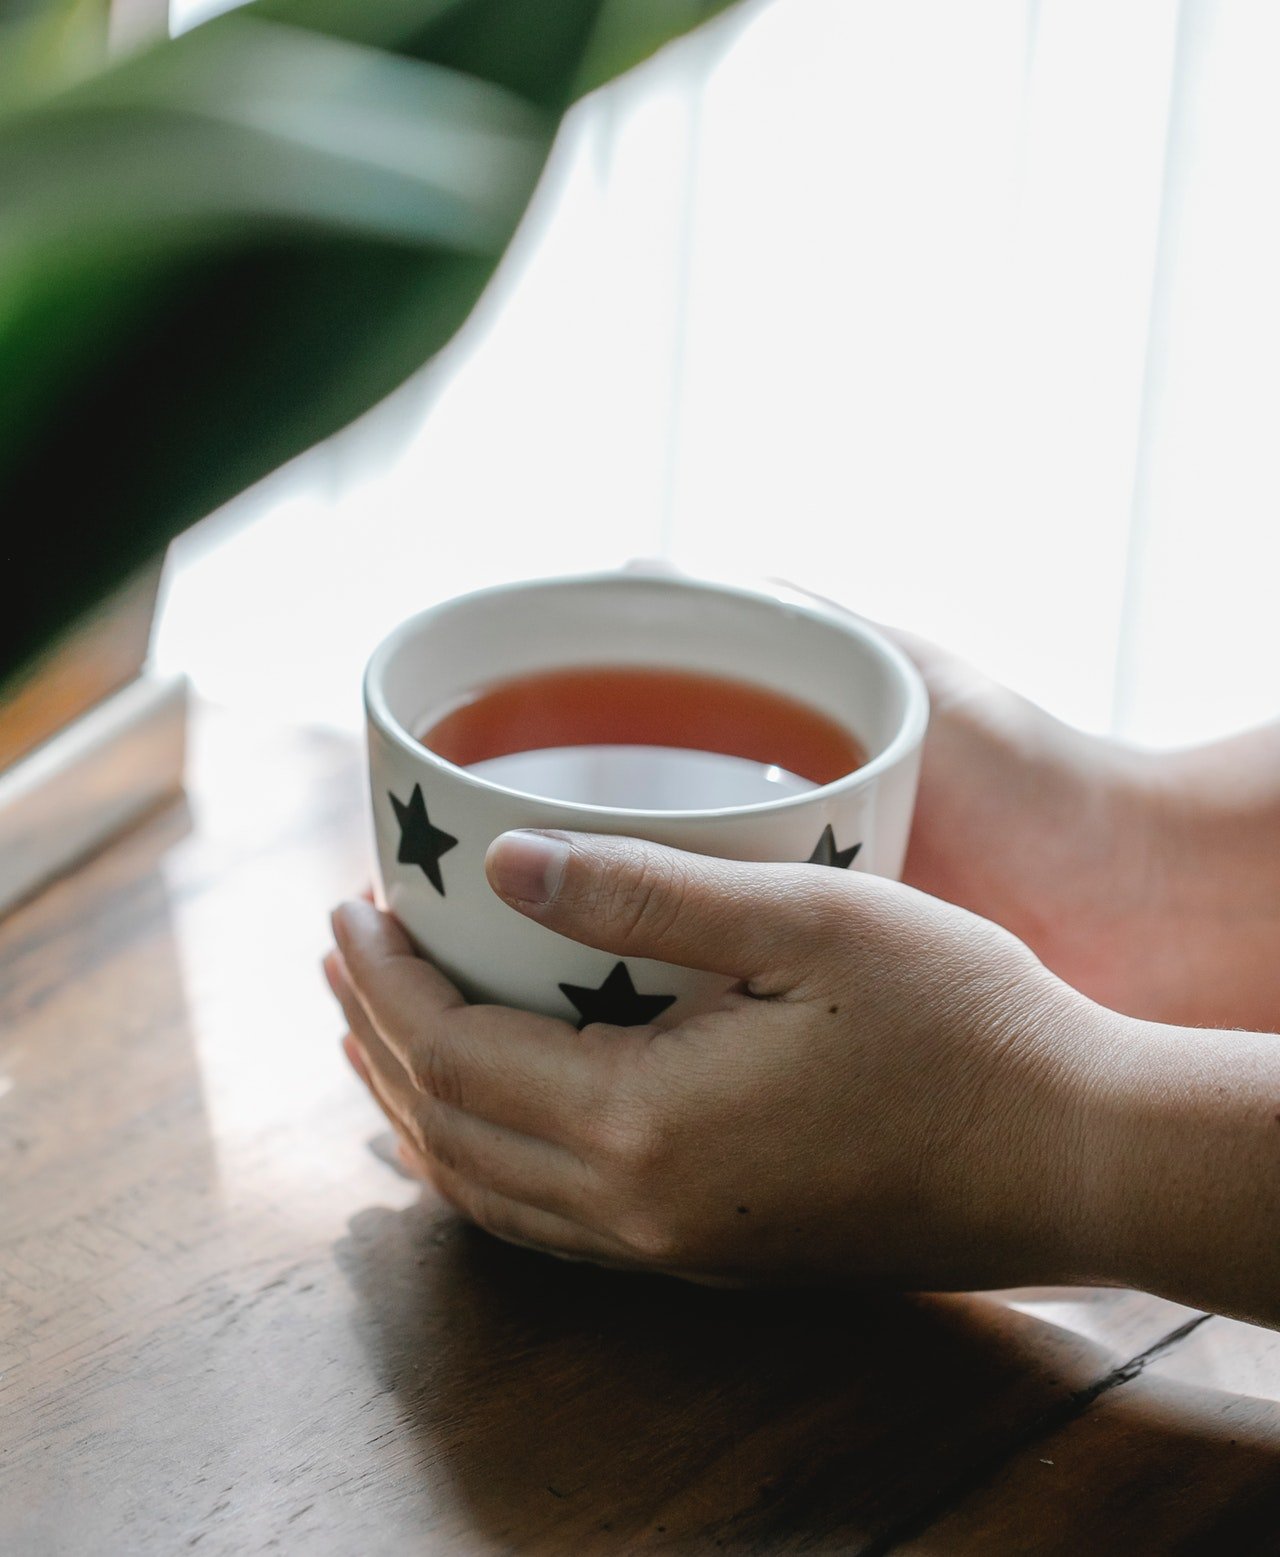 Simone drank tea and explained that she had cancer too. | Source: Pexels